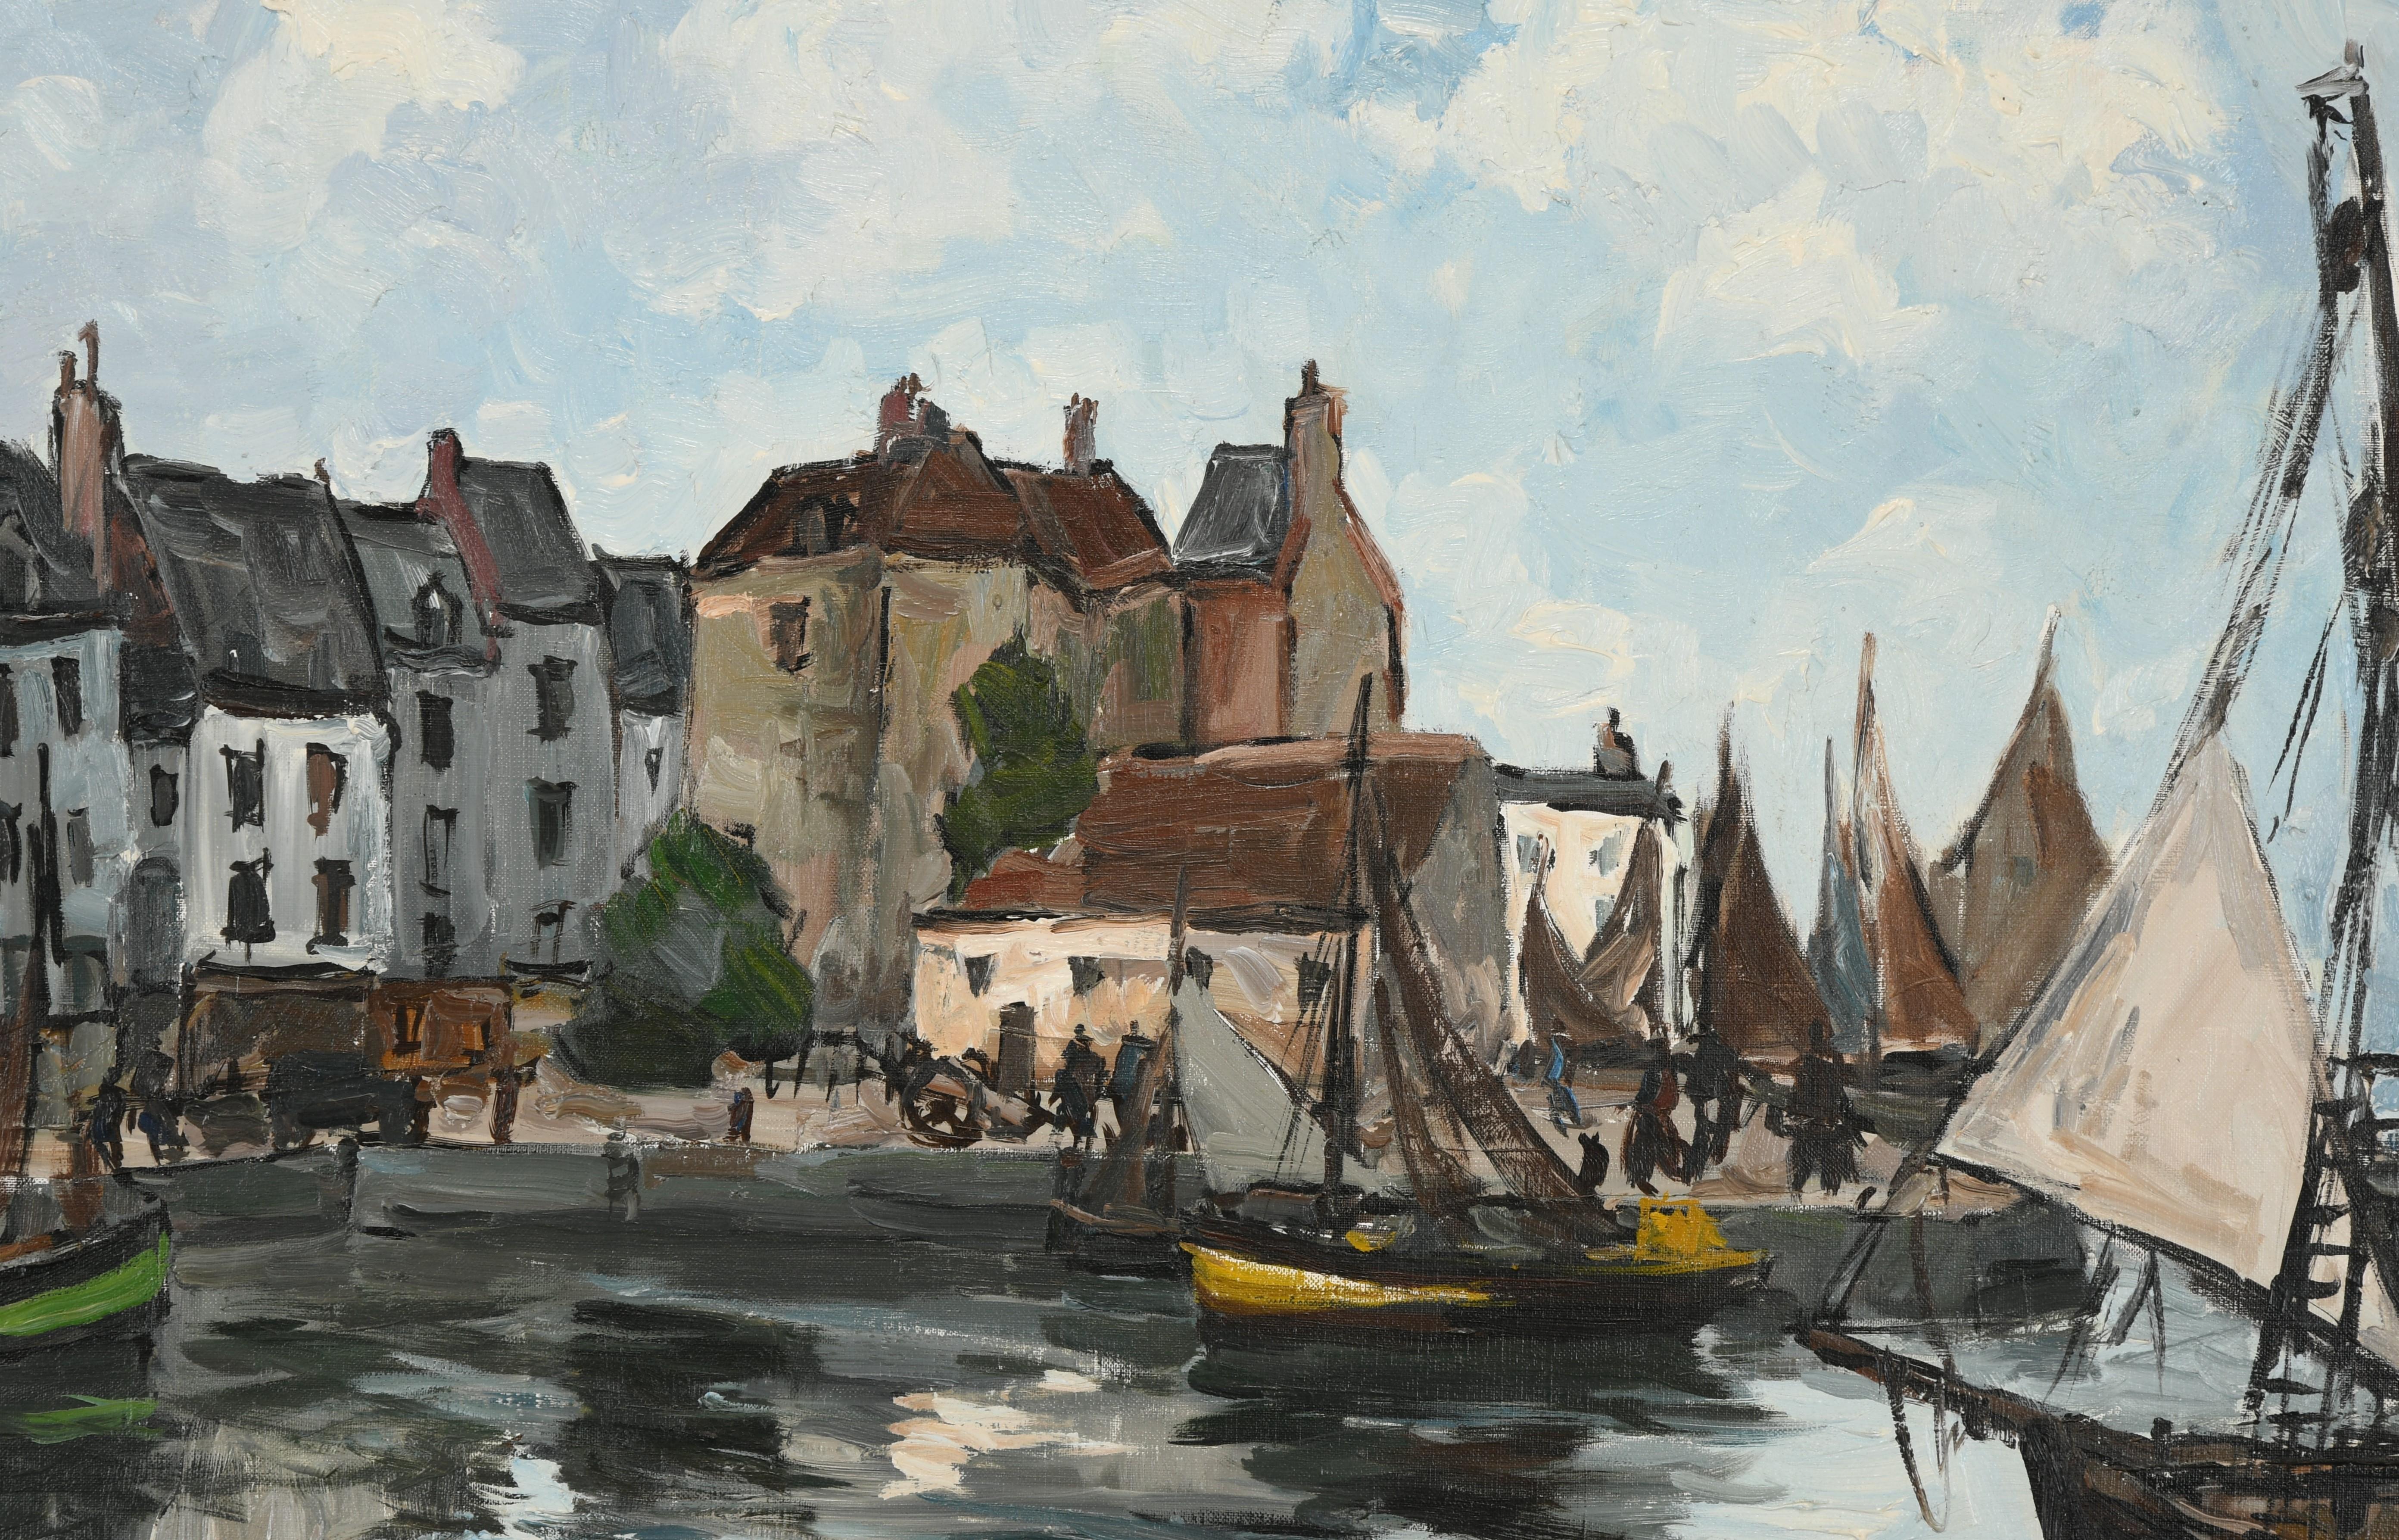 This impressive monumental painting by Fernand Herbo is of a harbor scene in France. Fernand Herbo was a French painter (1905 - 1995). This beautiful painting is a great example of his larger works. This is a chance to collect great investment art.